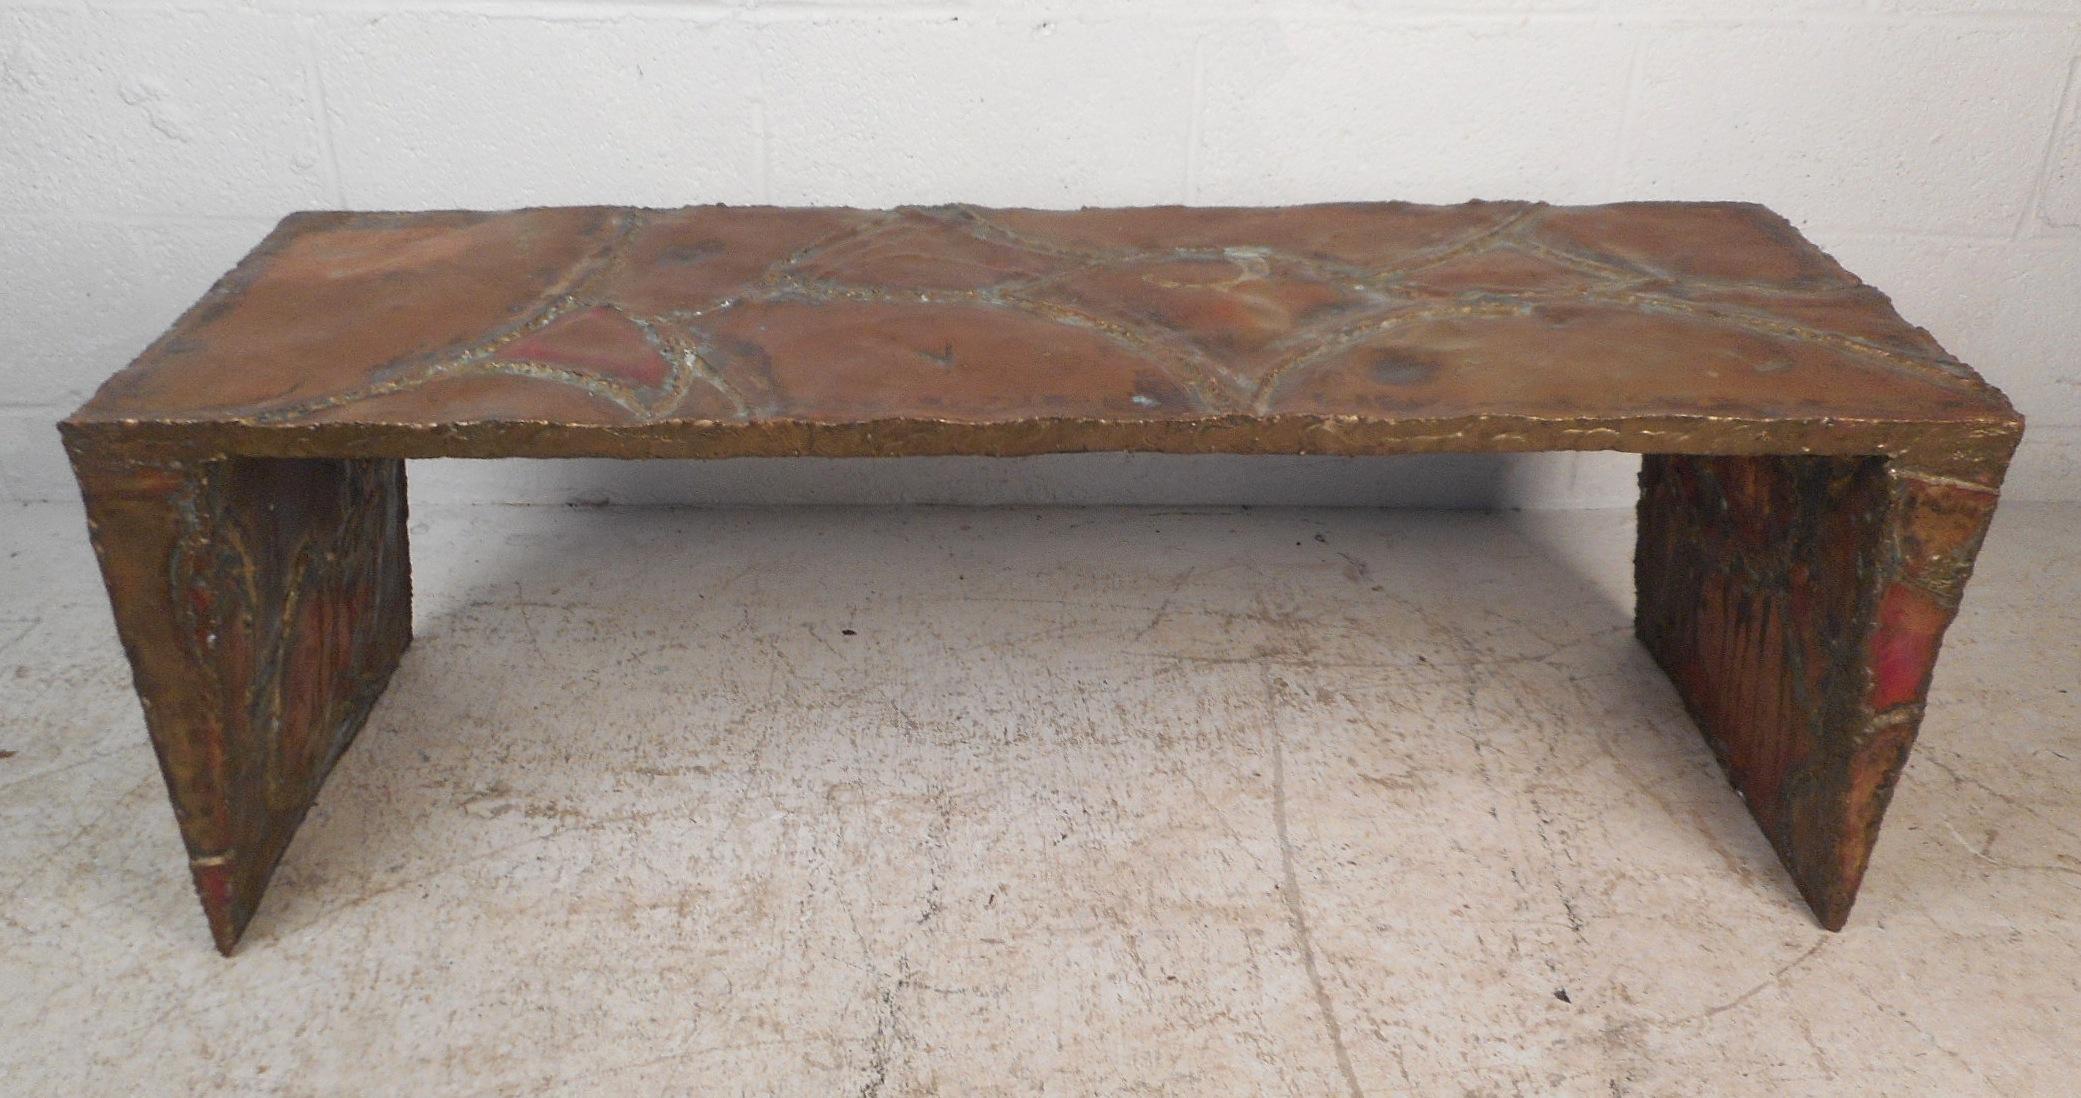 This beautiful vintage modern coffee table is signed by Silas Seandel, circa 1970s. A brutalist design that made of brass toned metals with gorgeous patina. The versatile shape with triangular legs allows this piece to fit perfectly in any setting.